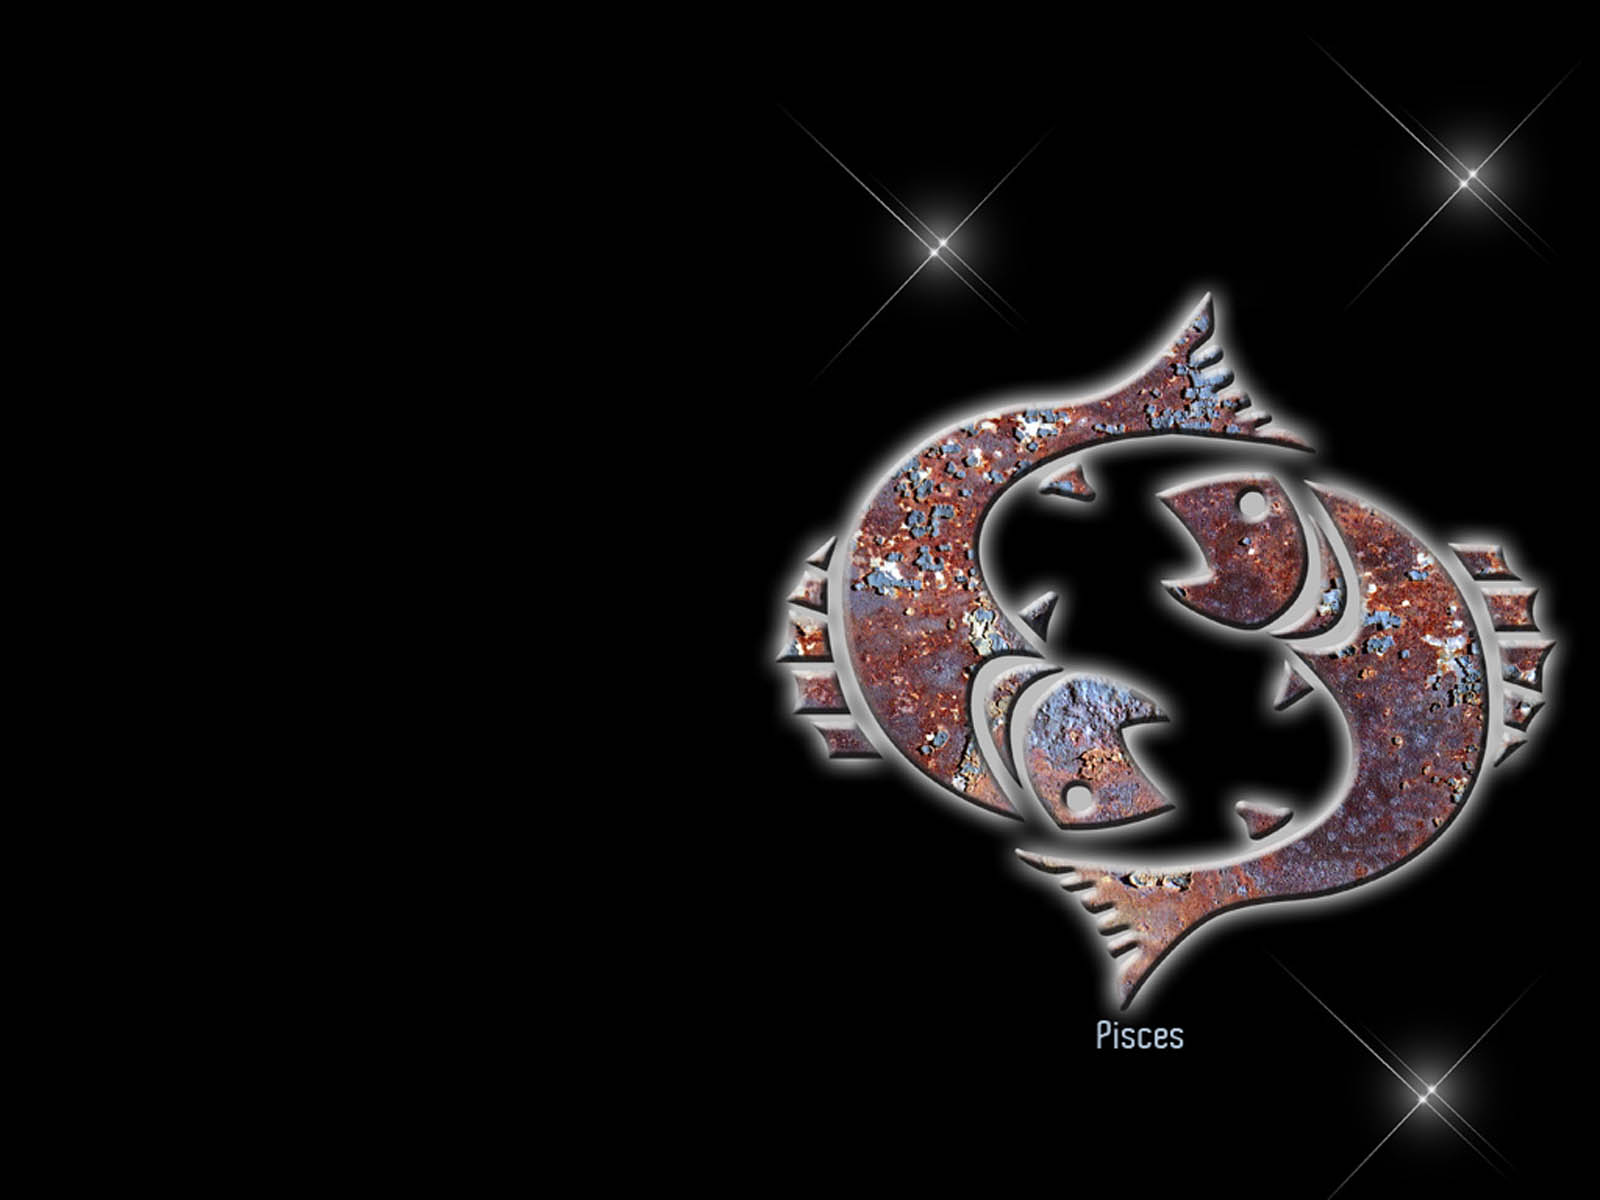 Tag Pisces Wallpaper Image Photos Pictures And Background For